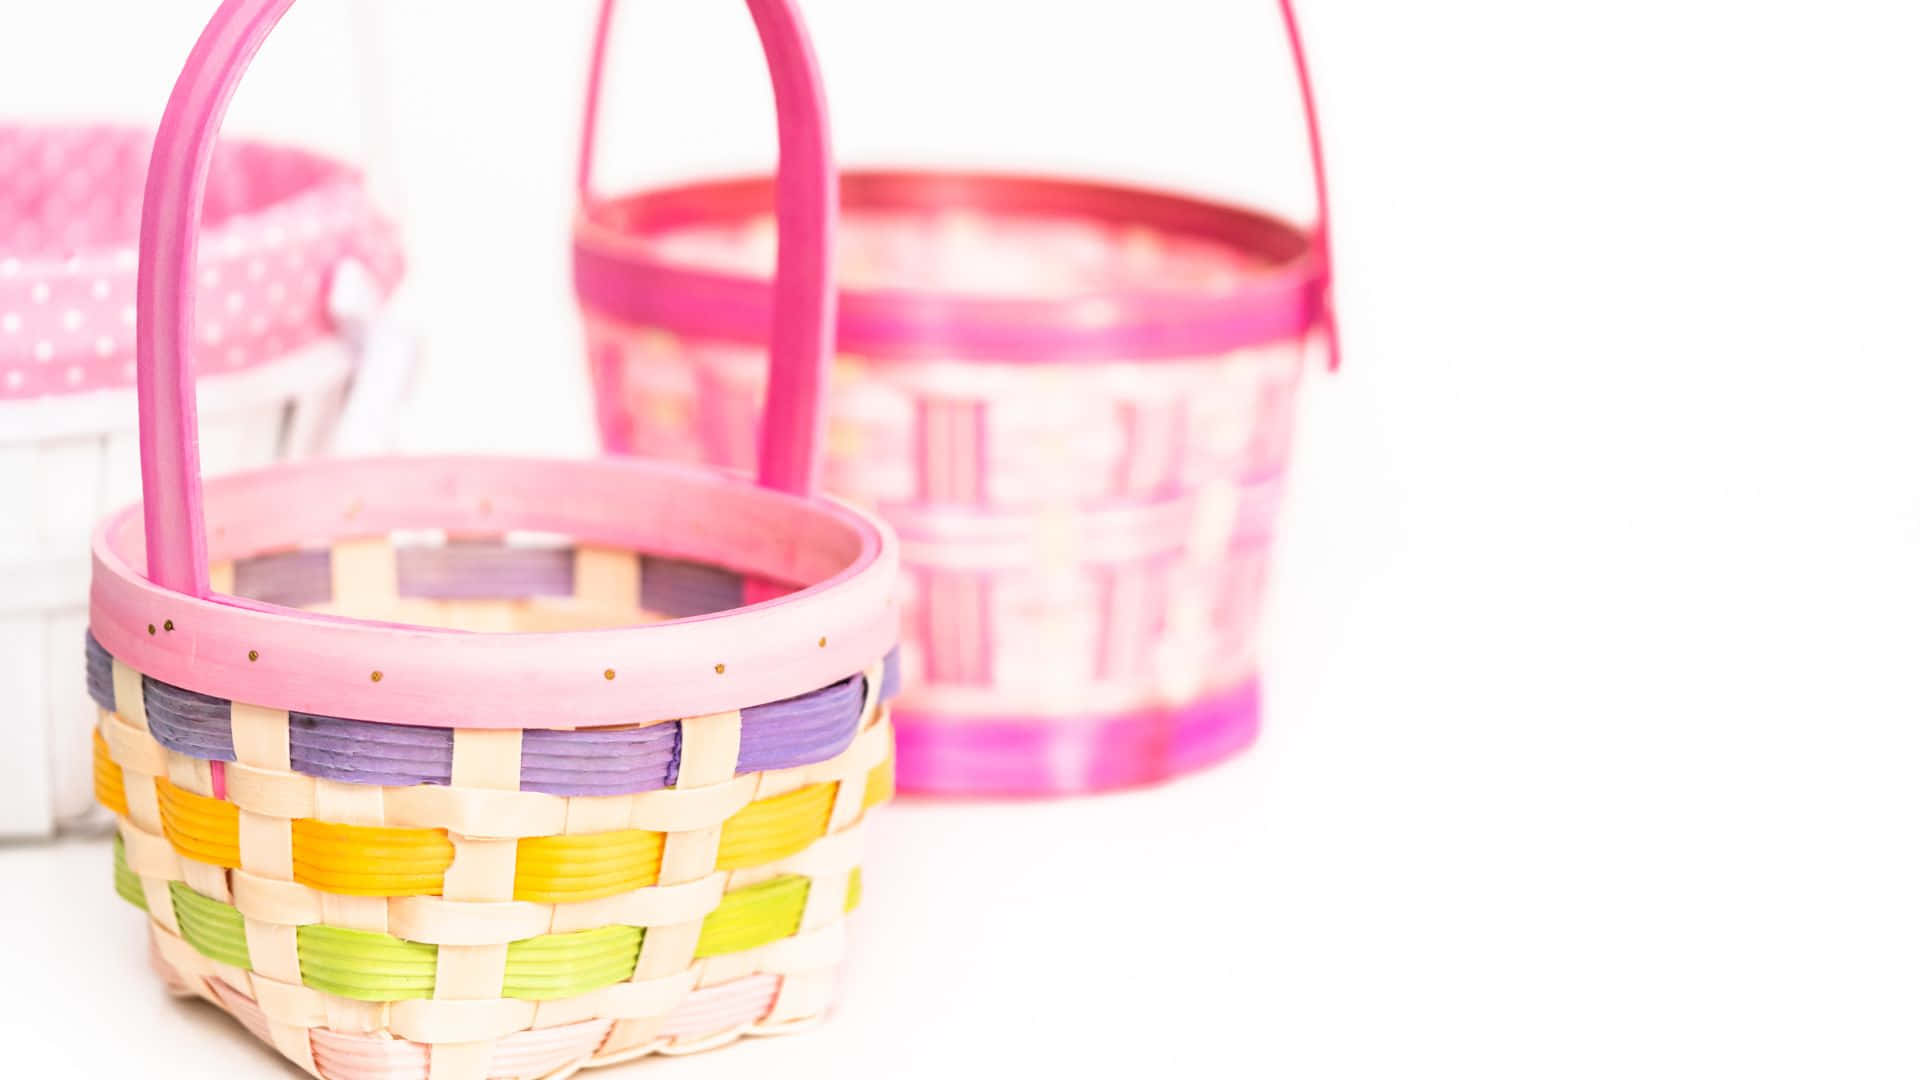 Know an Easter bunny fan? Surprise them with this delightful Easter basket! Wallpaper